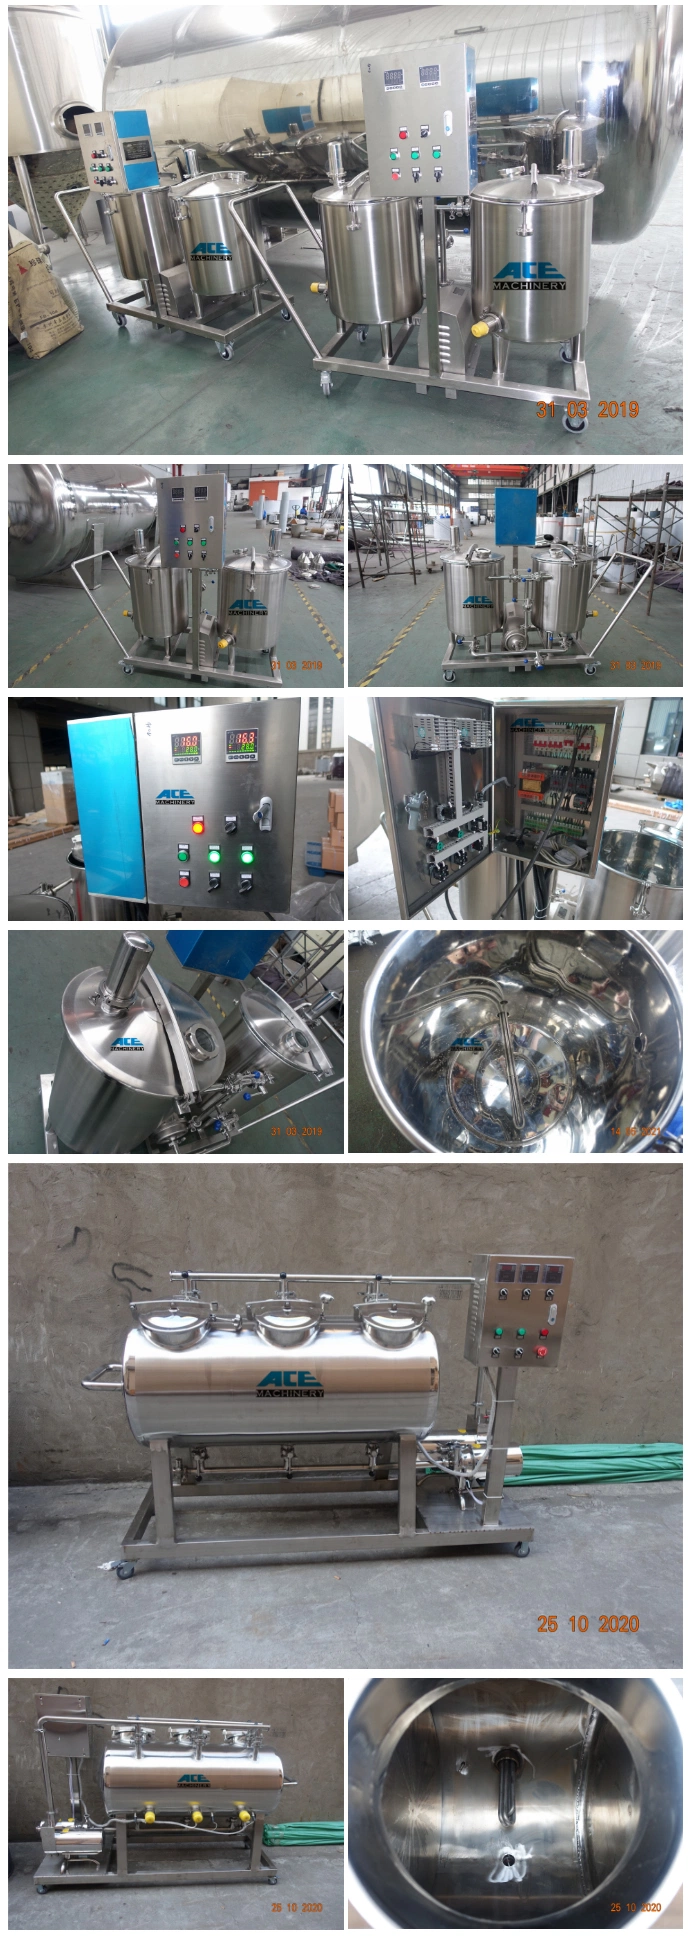 Best Price Integrated Cleaning System CIP Tank Cleaning in Place Washing Machine for Whole Line